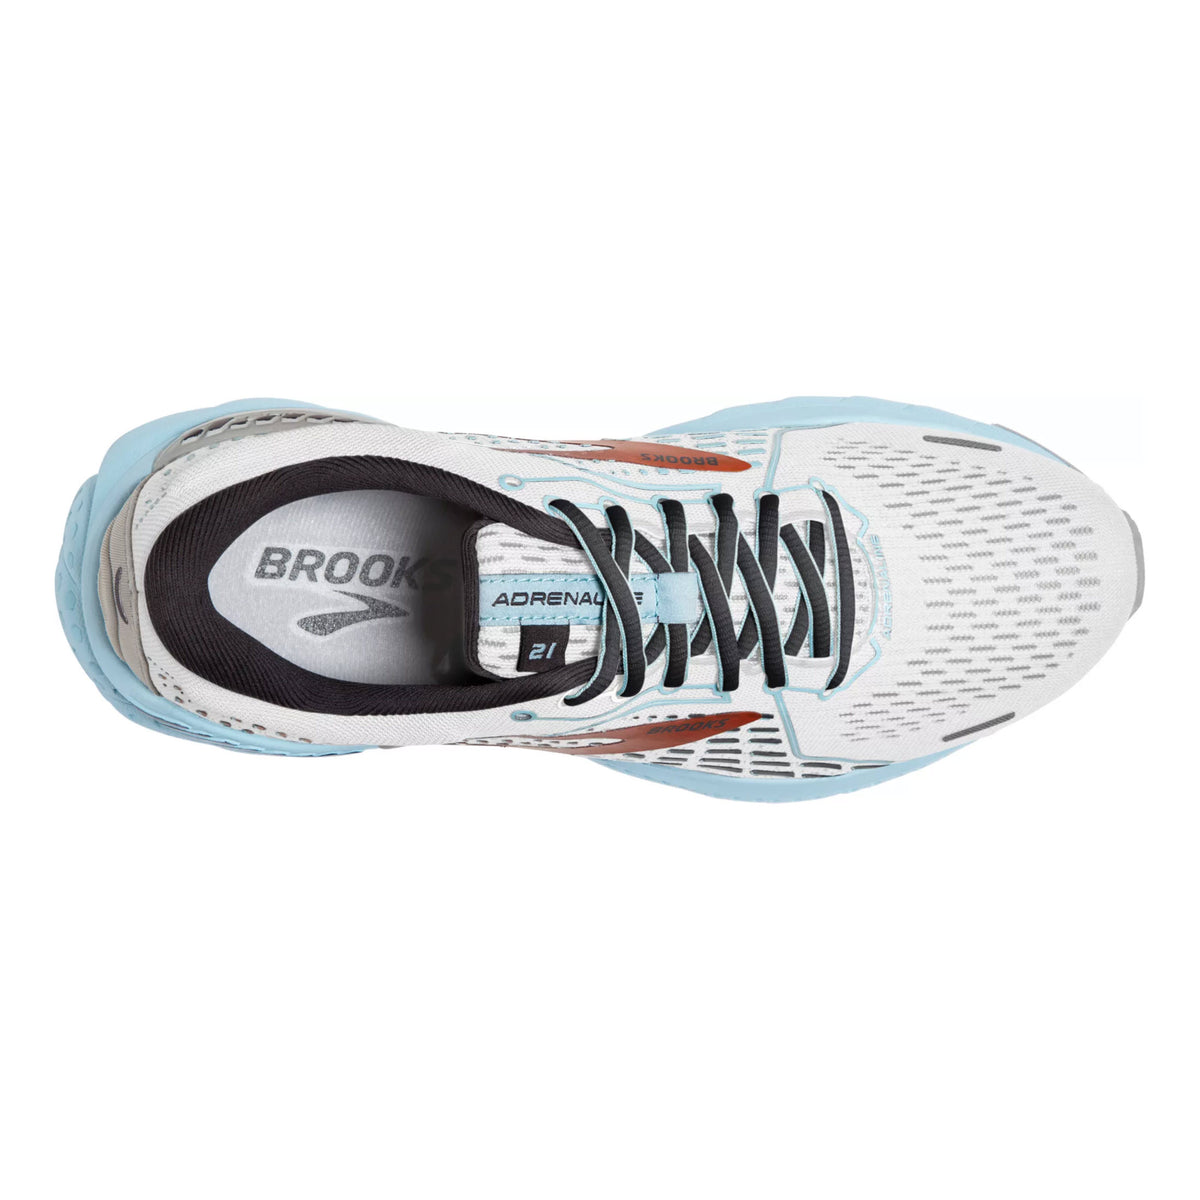 Top view of a blue and white Brooks Adrenaline GTS 21 running shoe, featuring stability and cushioning.